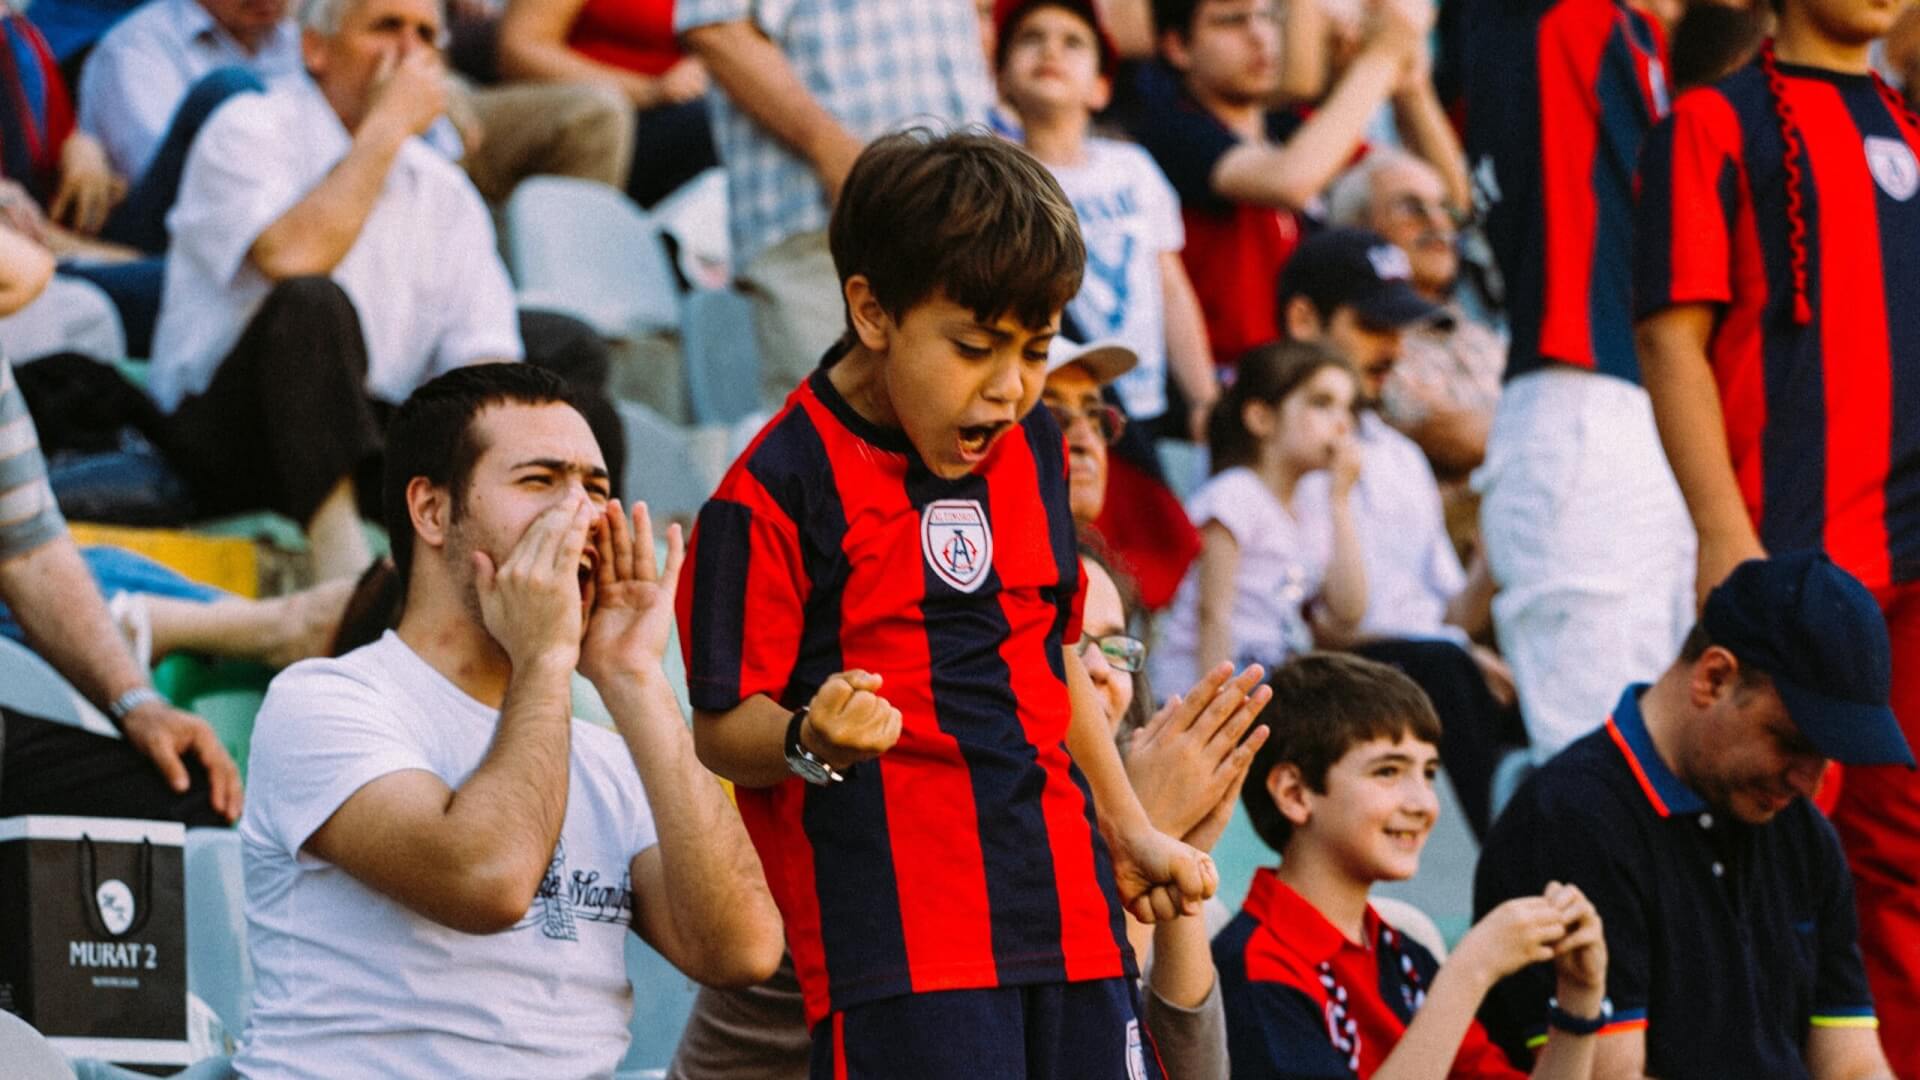 An excited football fan fist bumping the air thanks to 1:! supporter interaction